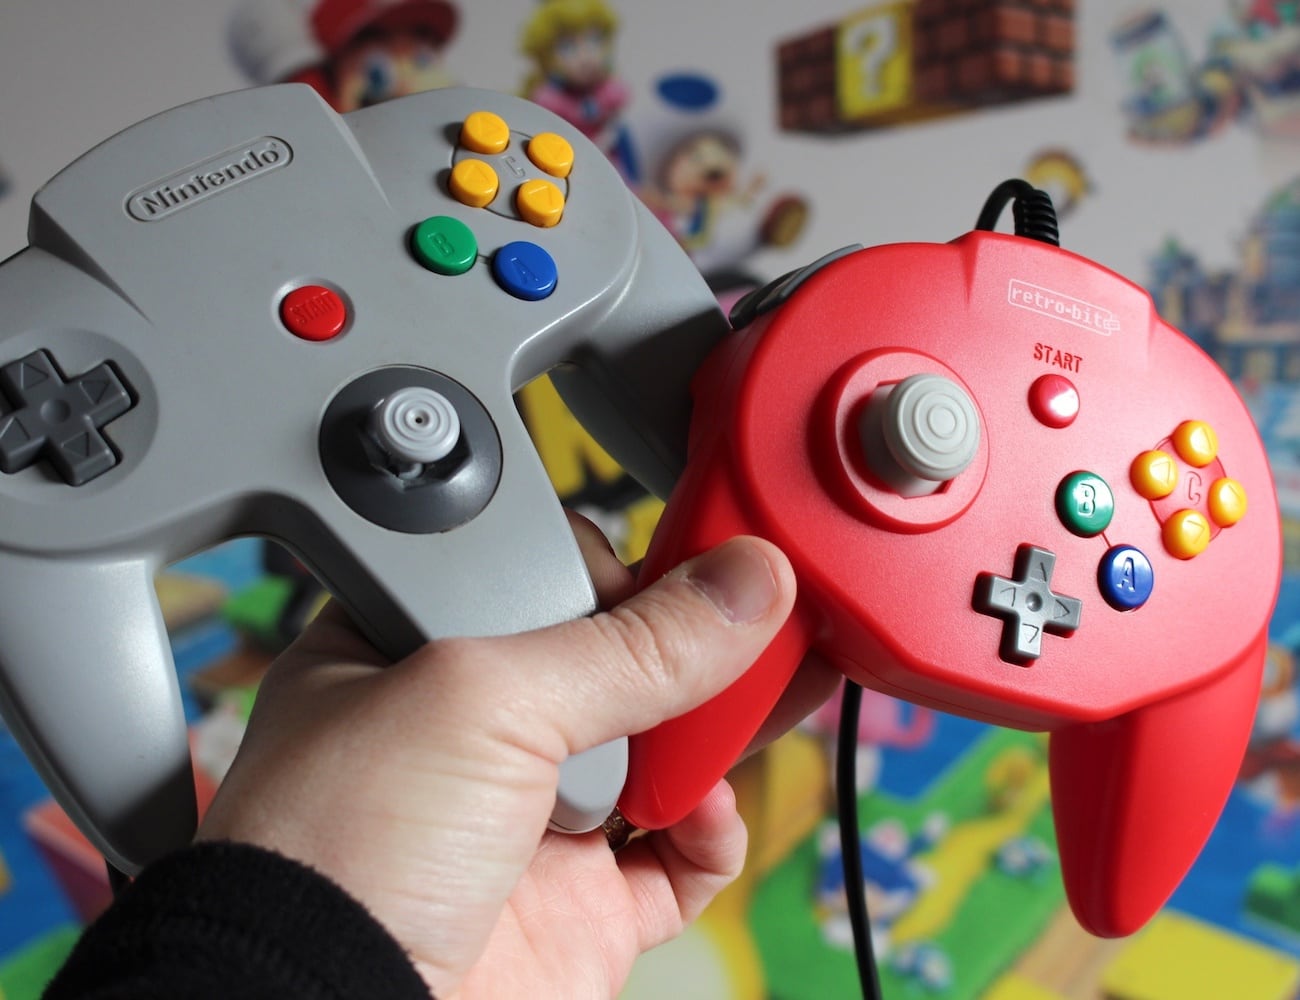 Retro-Bit Tribute64 Modern N64 Controller is a redesign of the classic video game controller